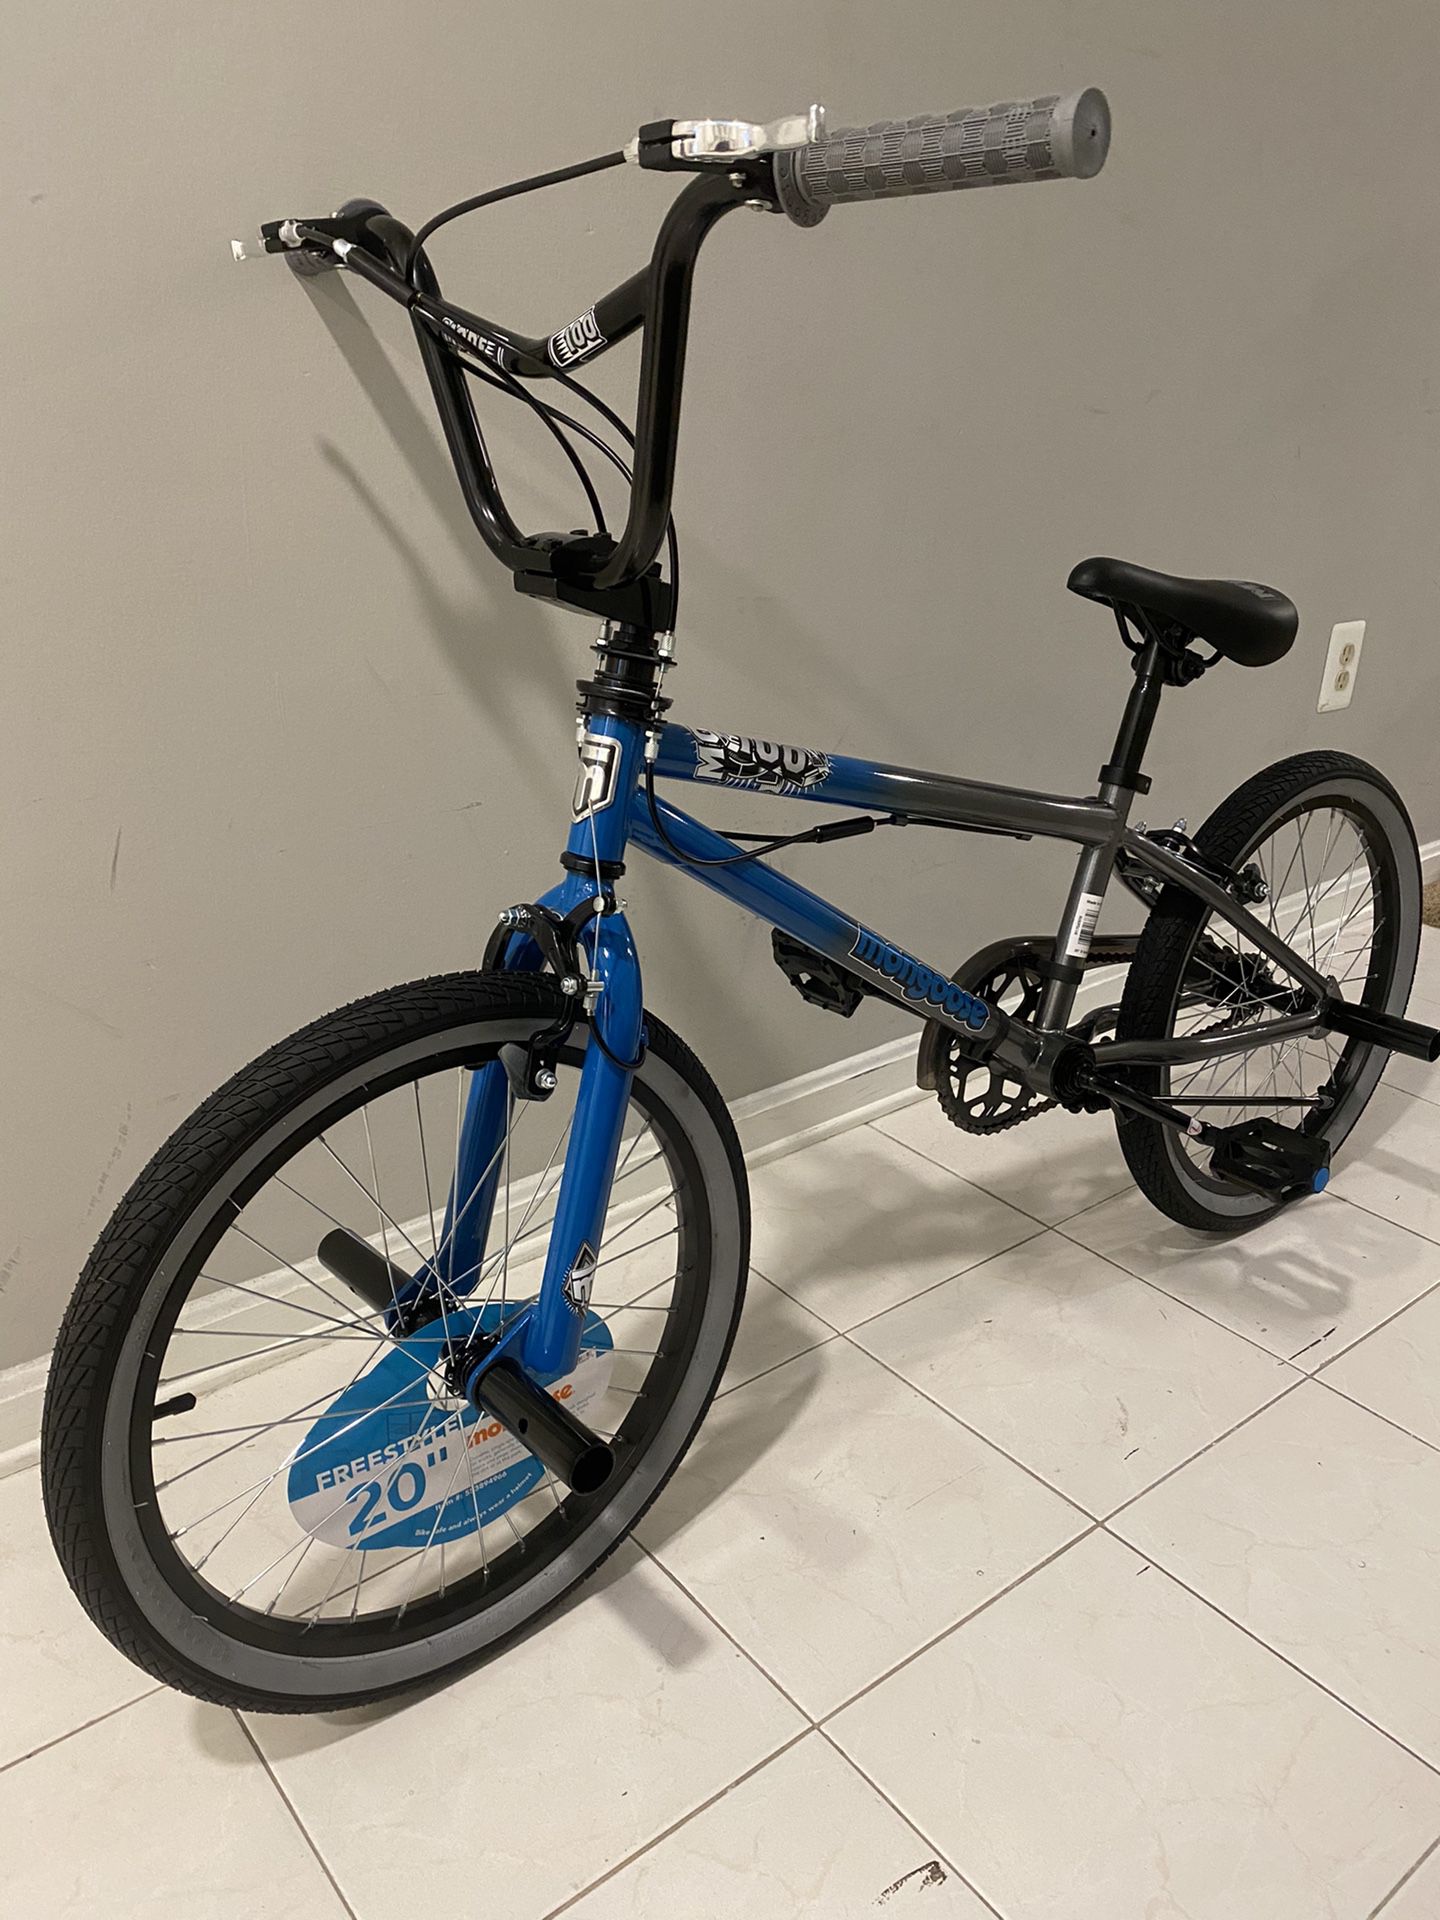 Brand New Mongoose 20” BMX front and rear pegs, gyro neck- hot bike!